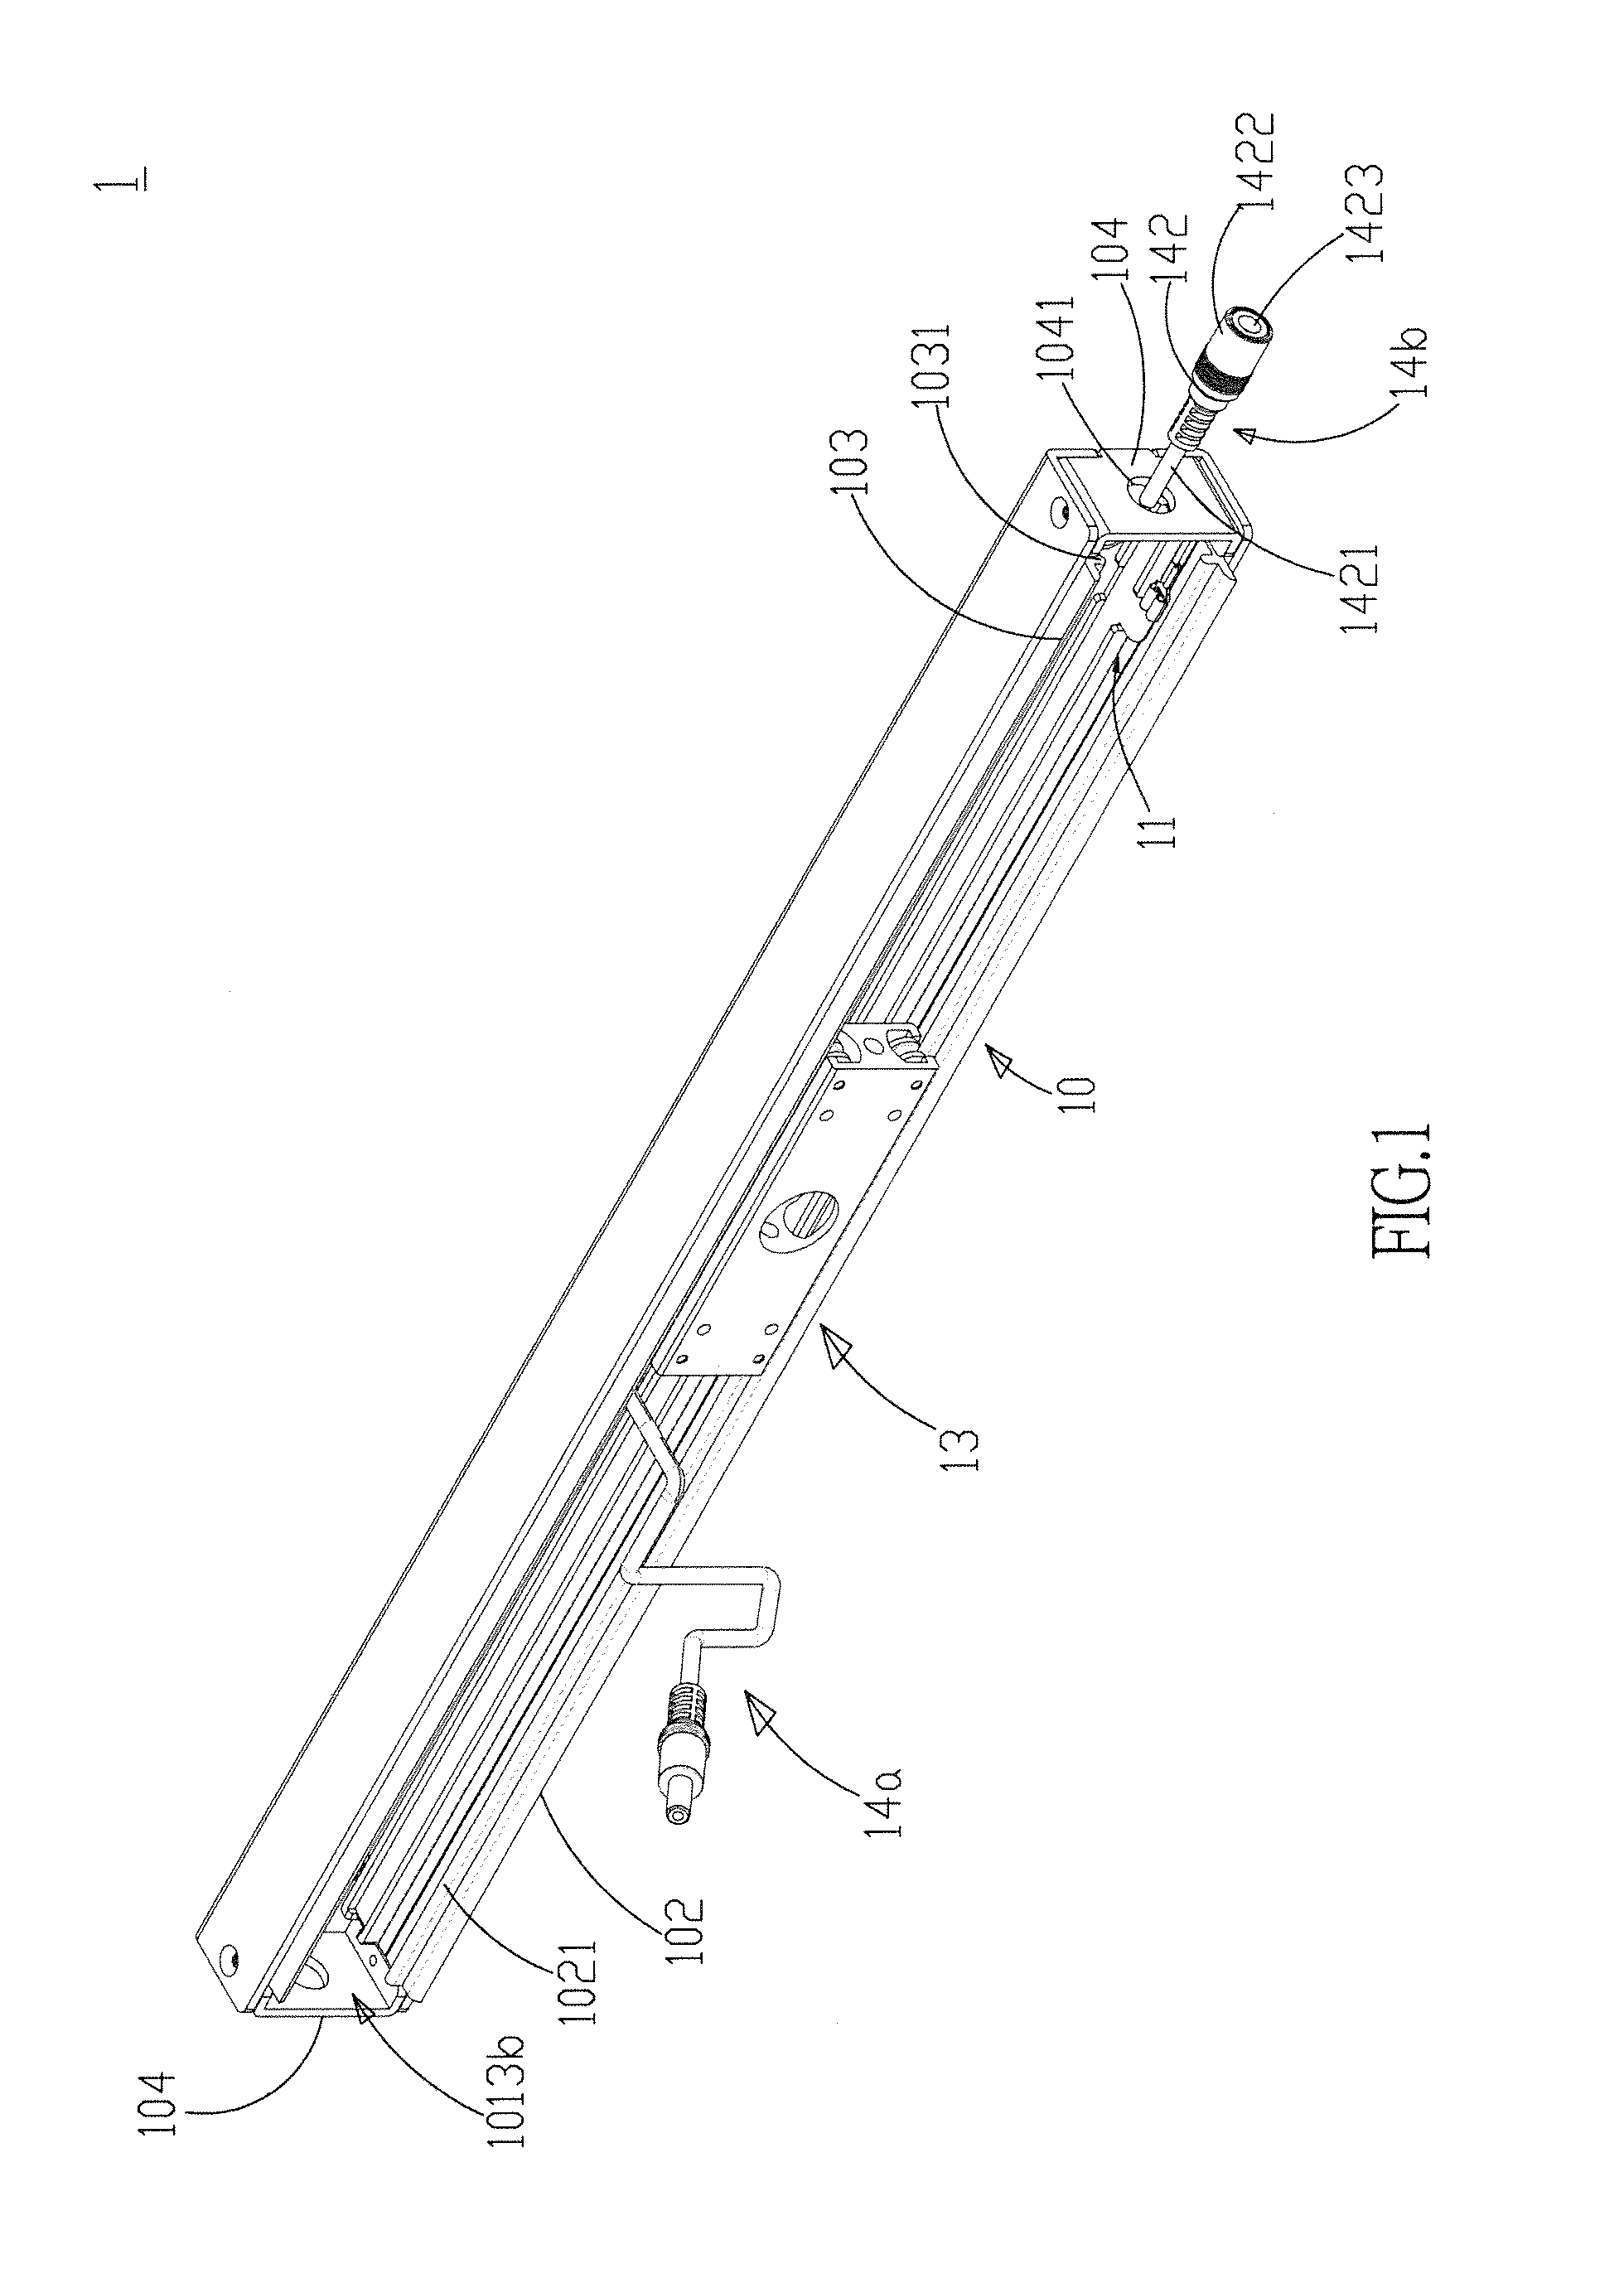 Track structure capable of supplying power